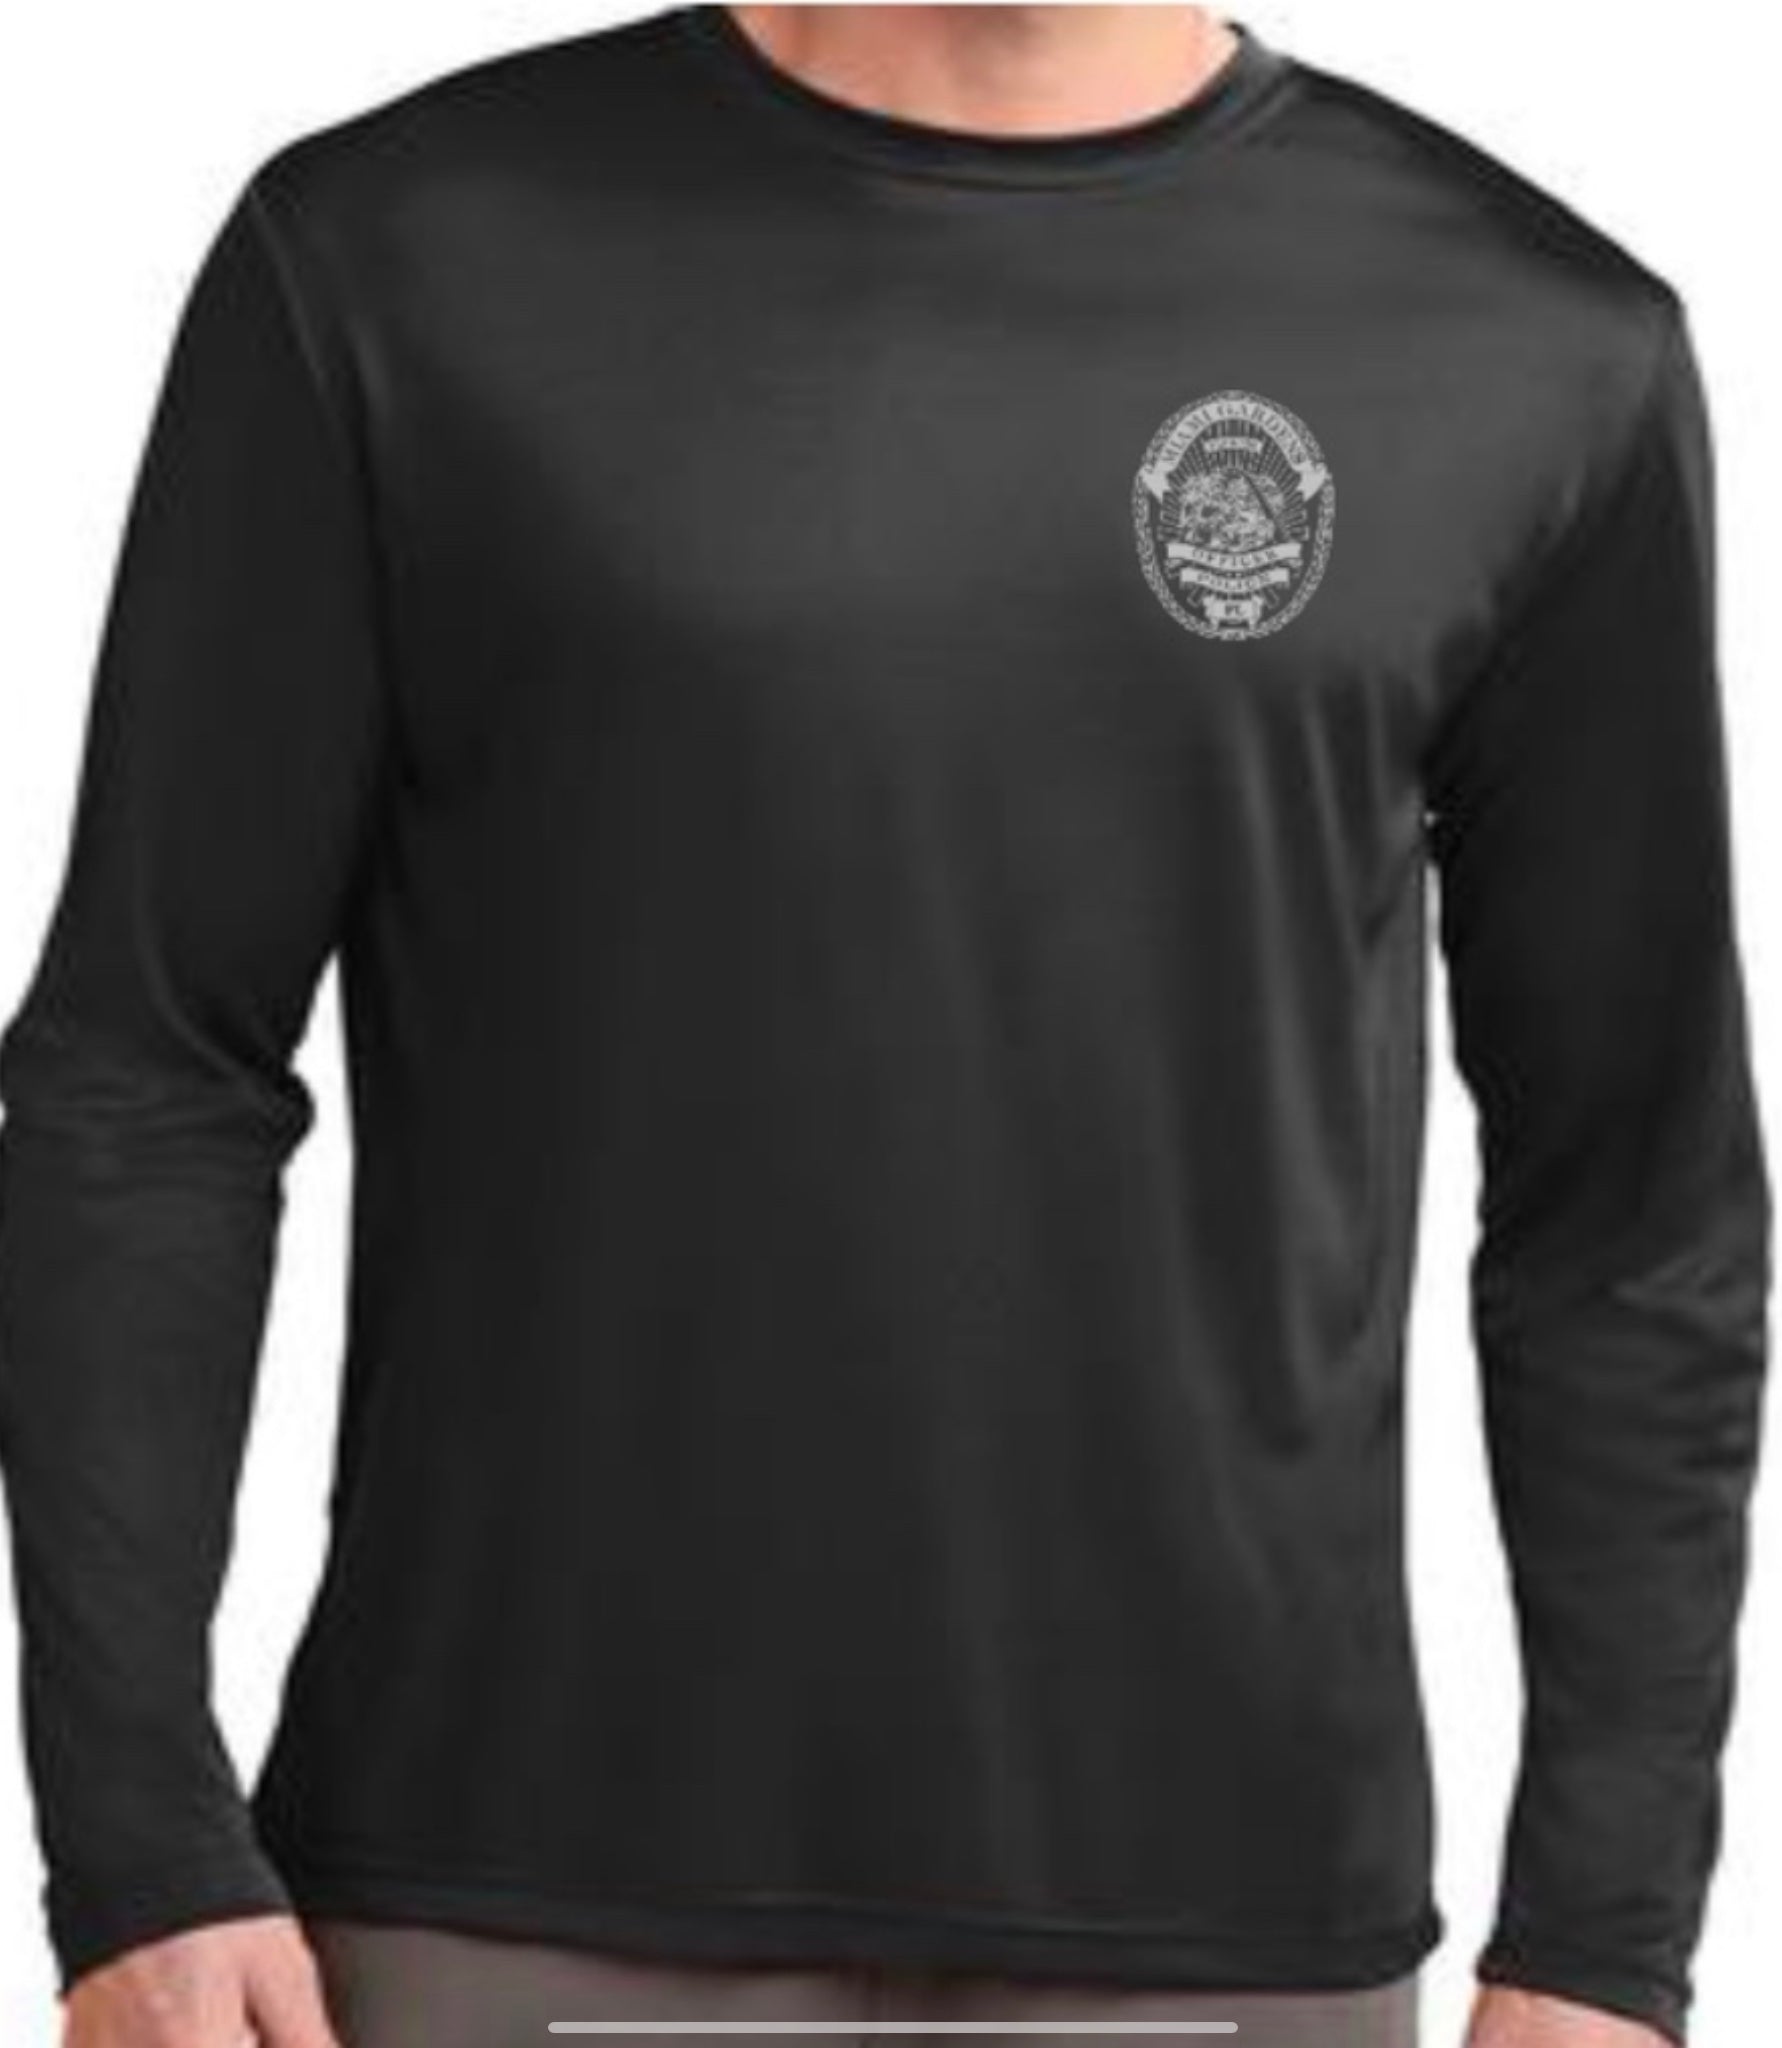 Miami Gardens Police Department Cooling Performance Longsleeve Tee